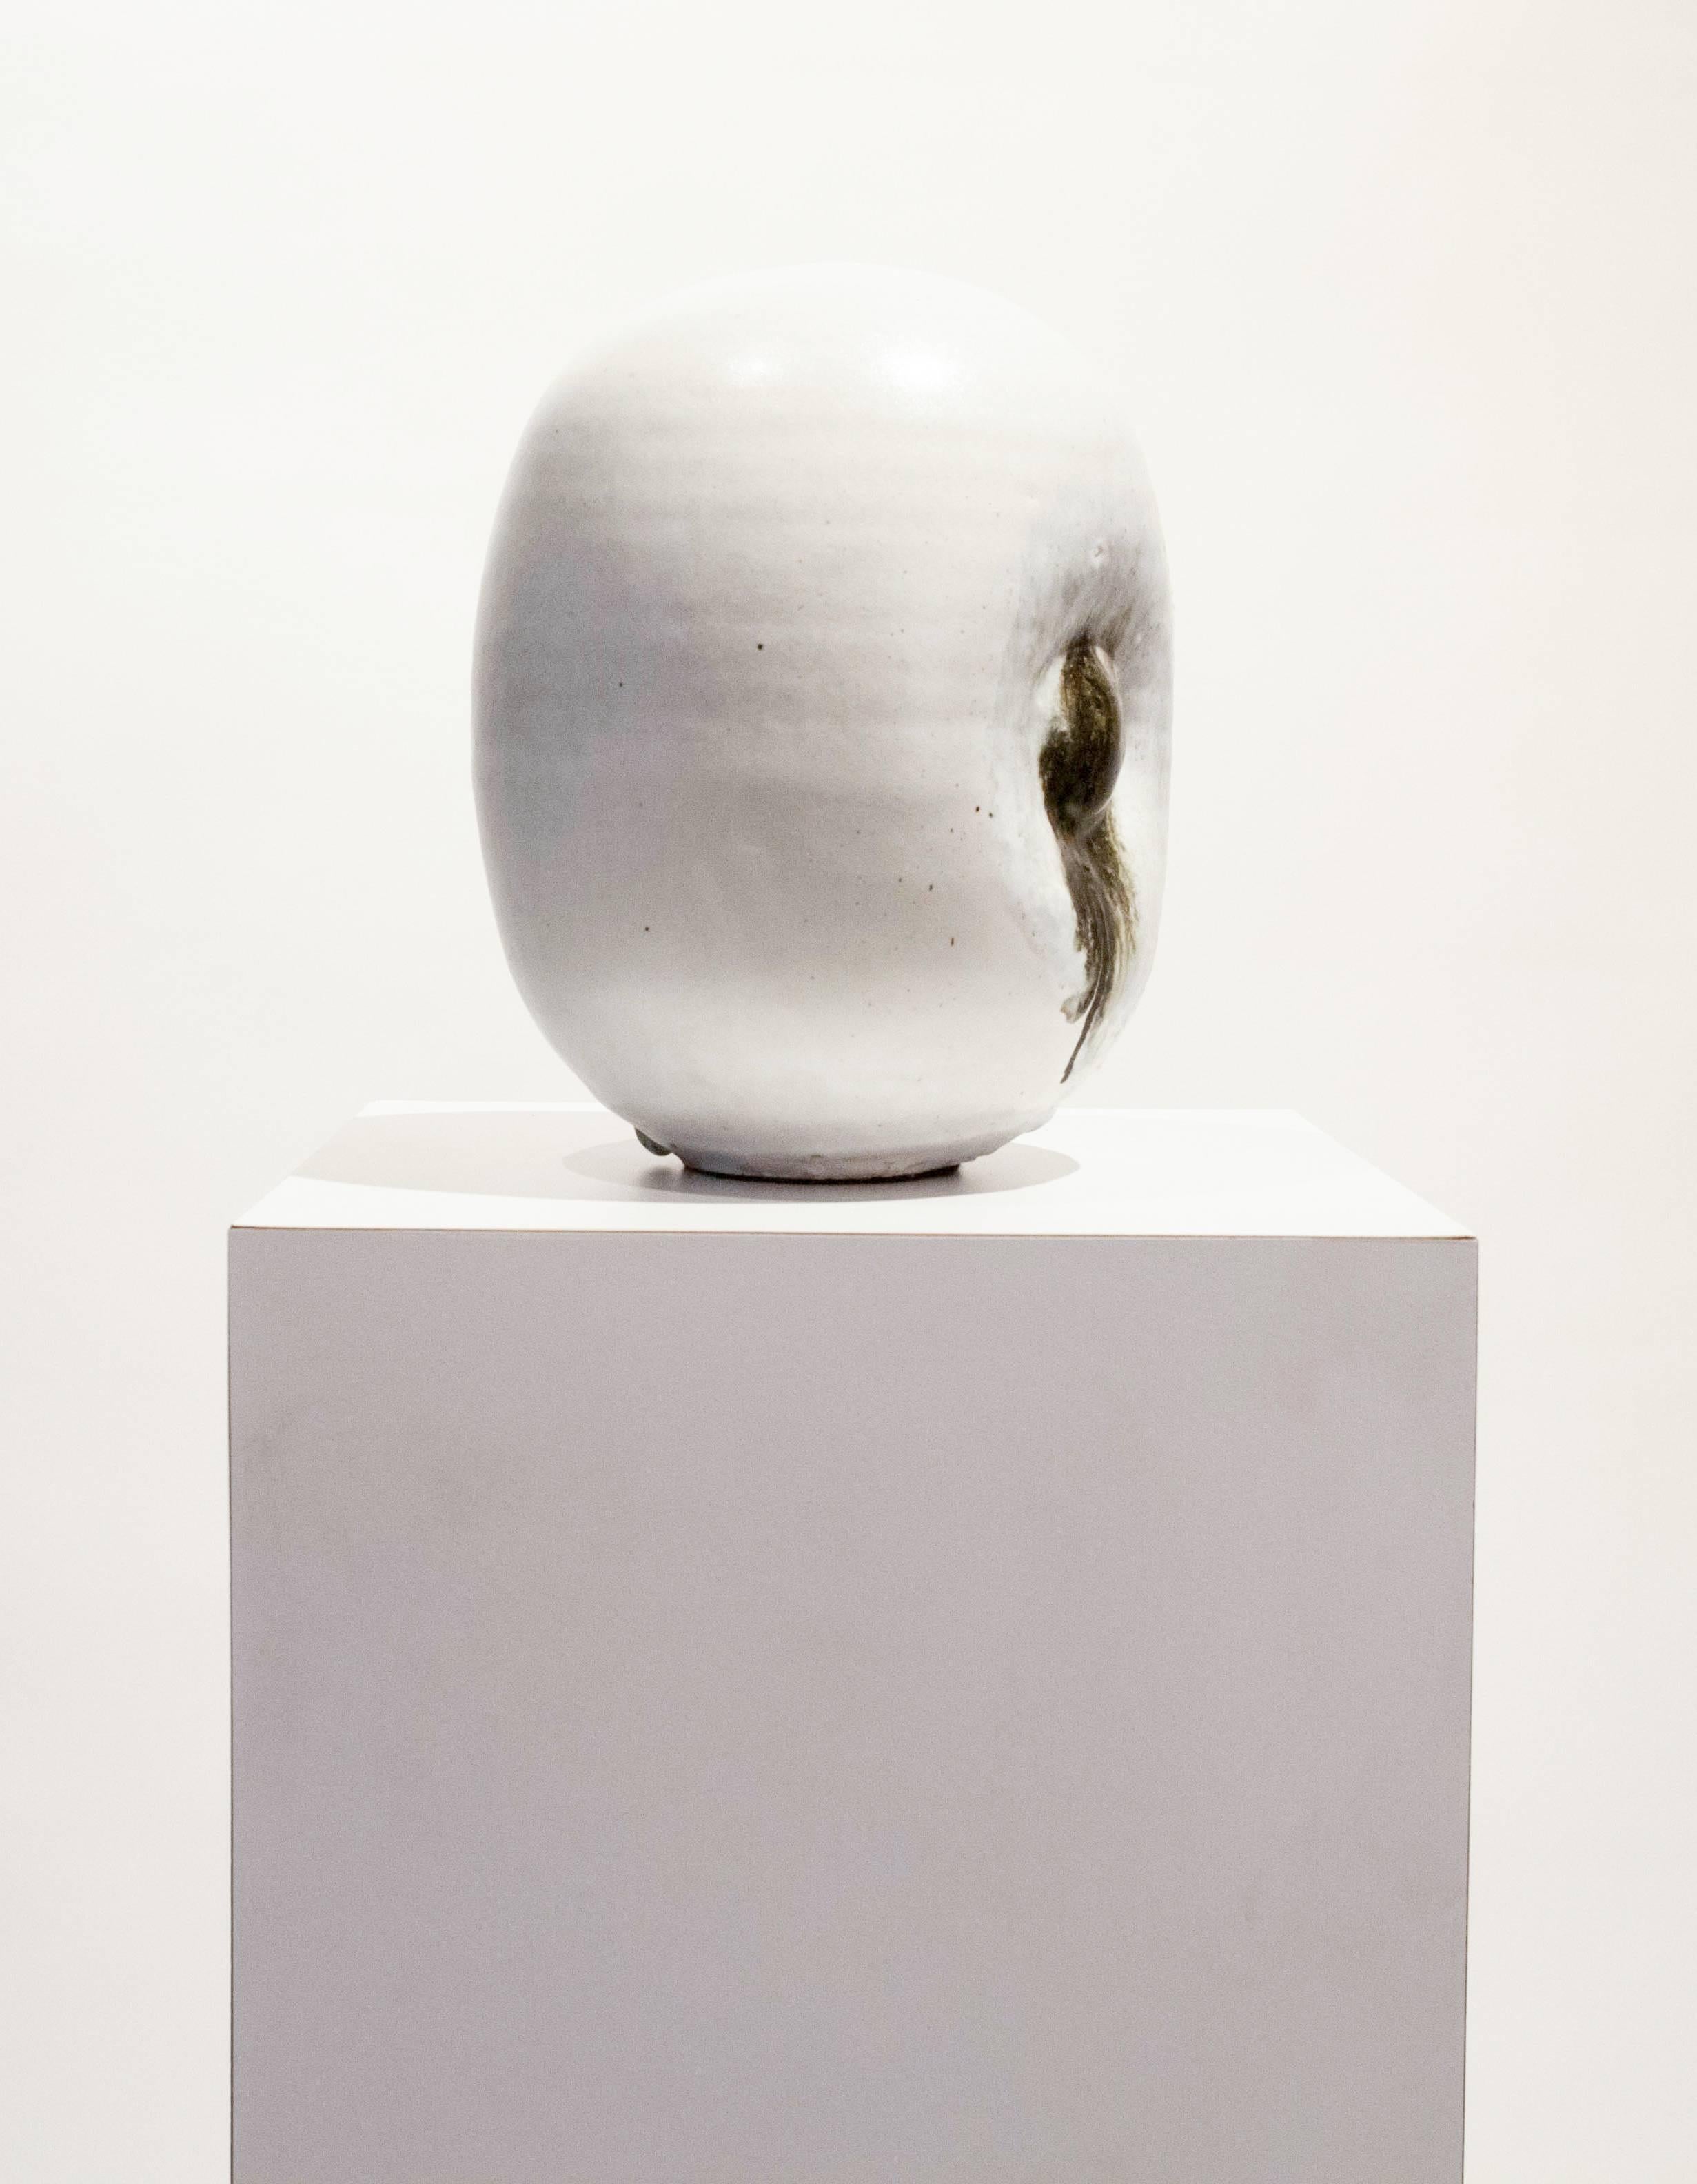 A compelling ceramic sculpture by Darcy Badiali, 2015. This head sized composition has a cycloptic 